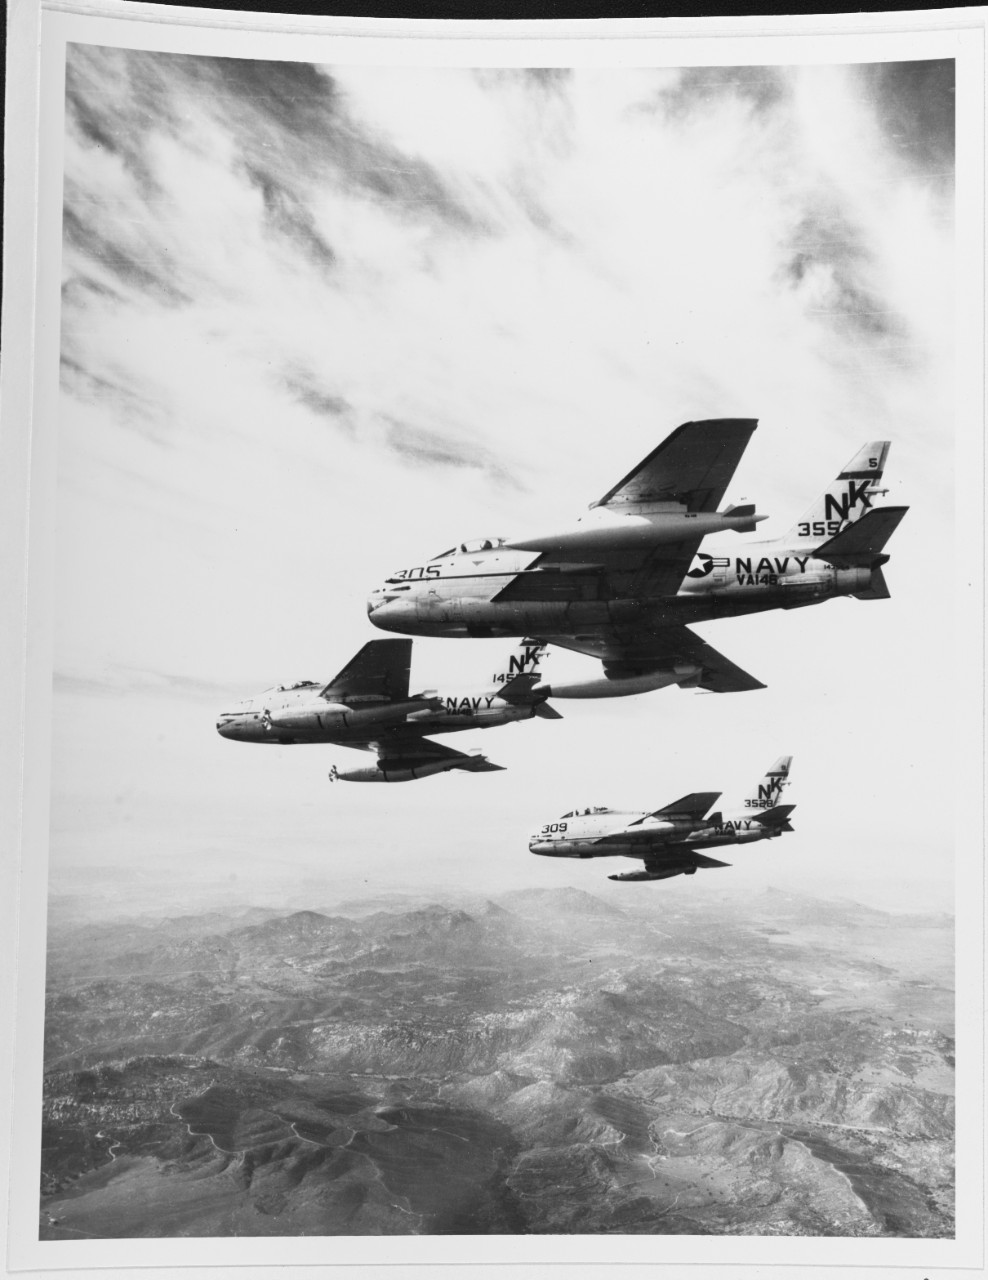 No. American FJ-4B "FURY" Fighters of VA-146, in formation, 13 February 1961.